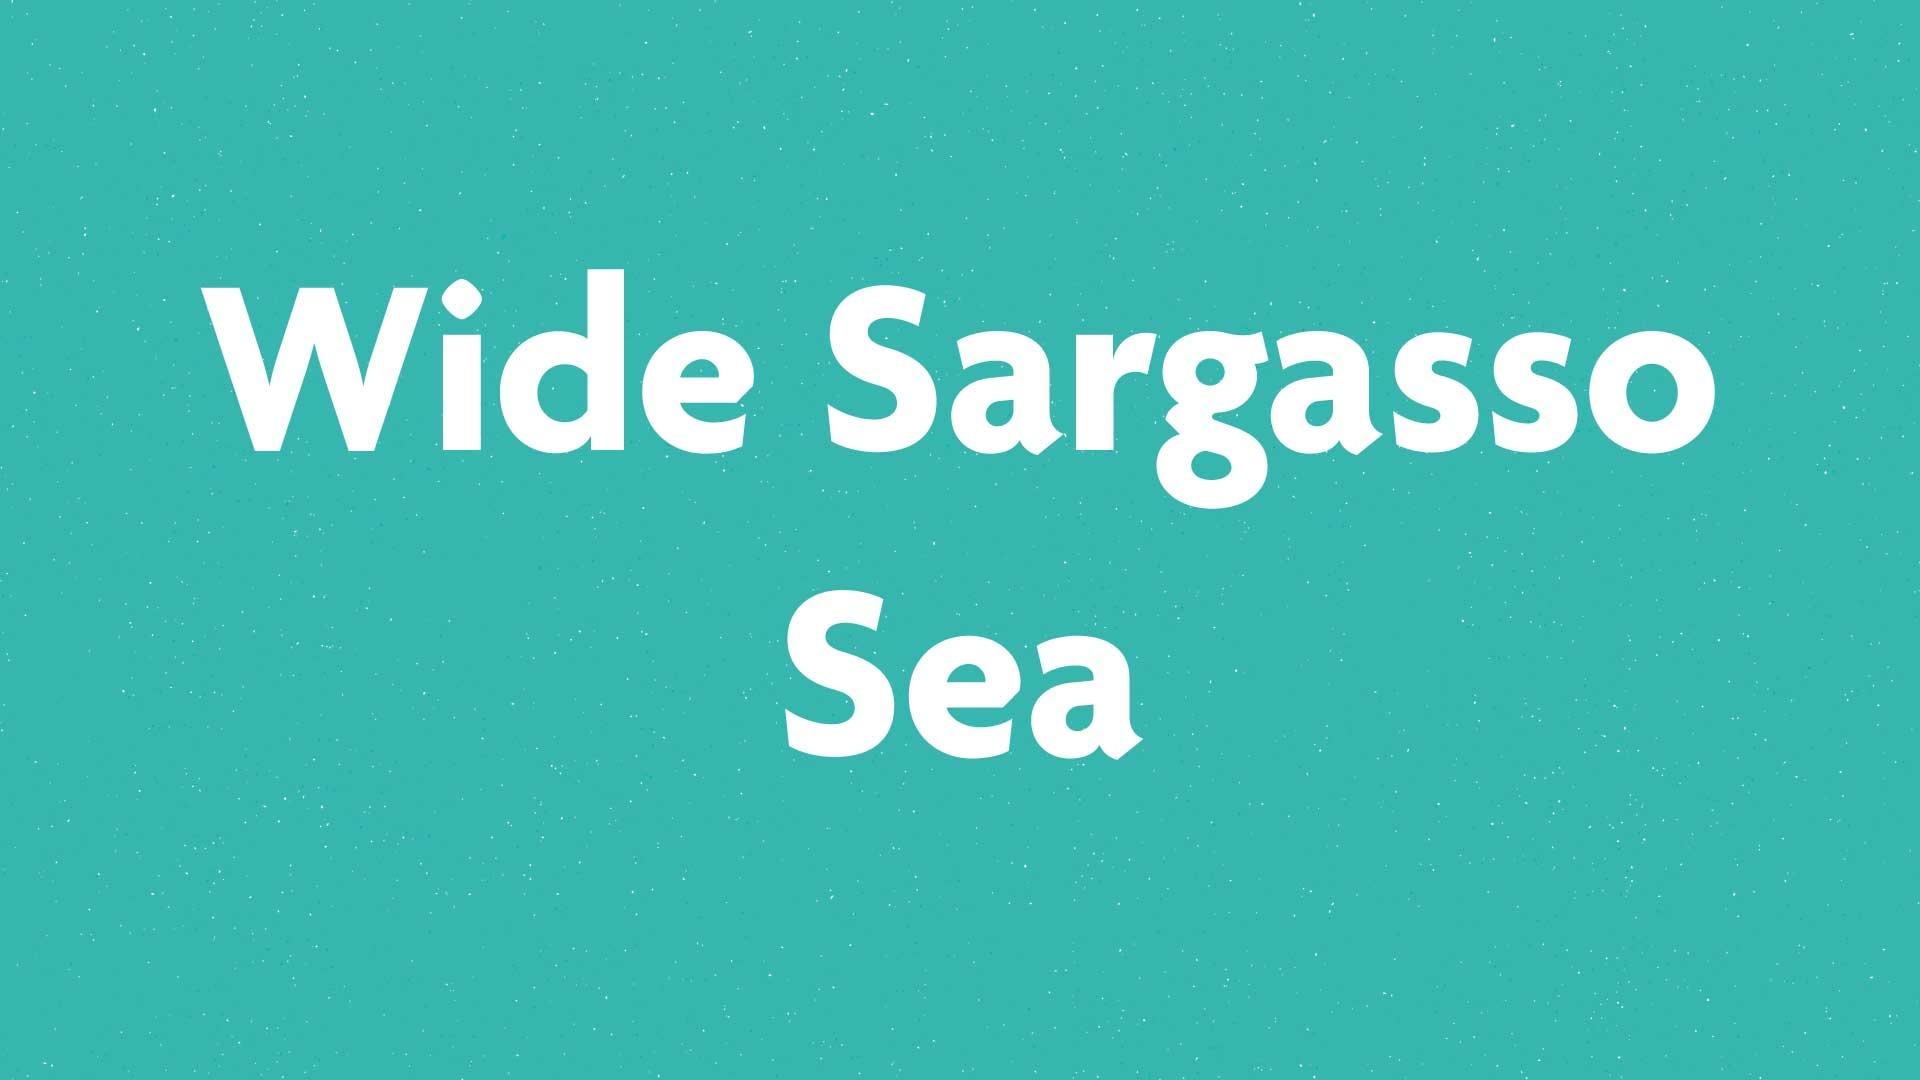 Wide Sargasso Sea book submission card on a green background.